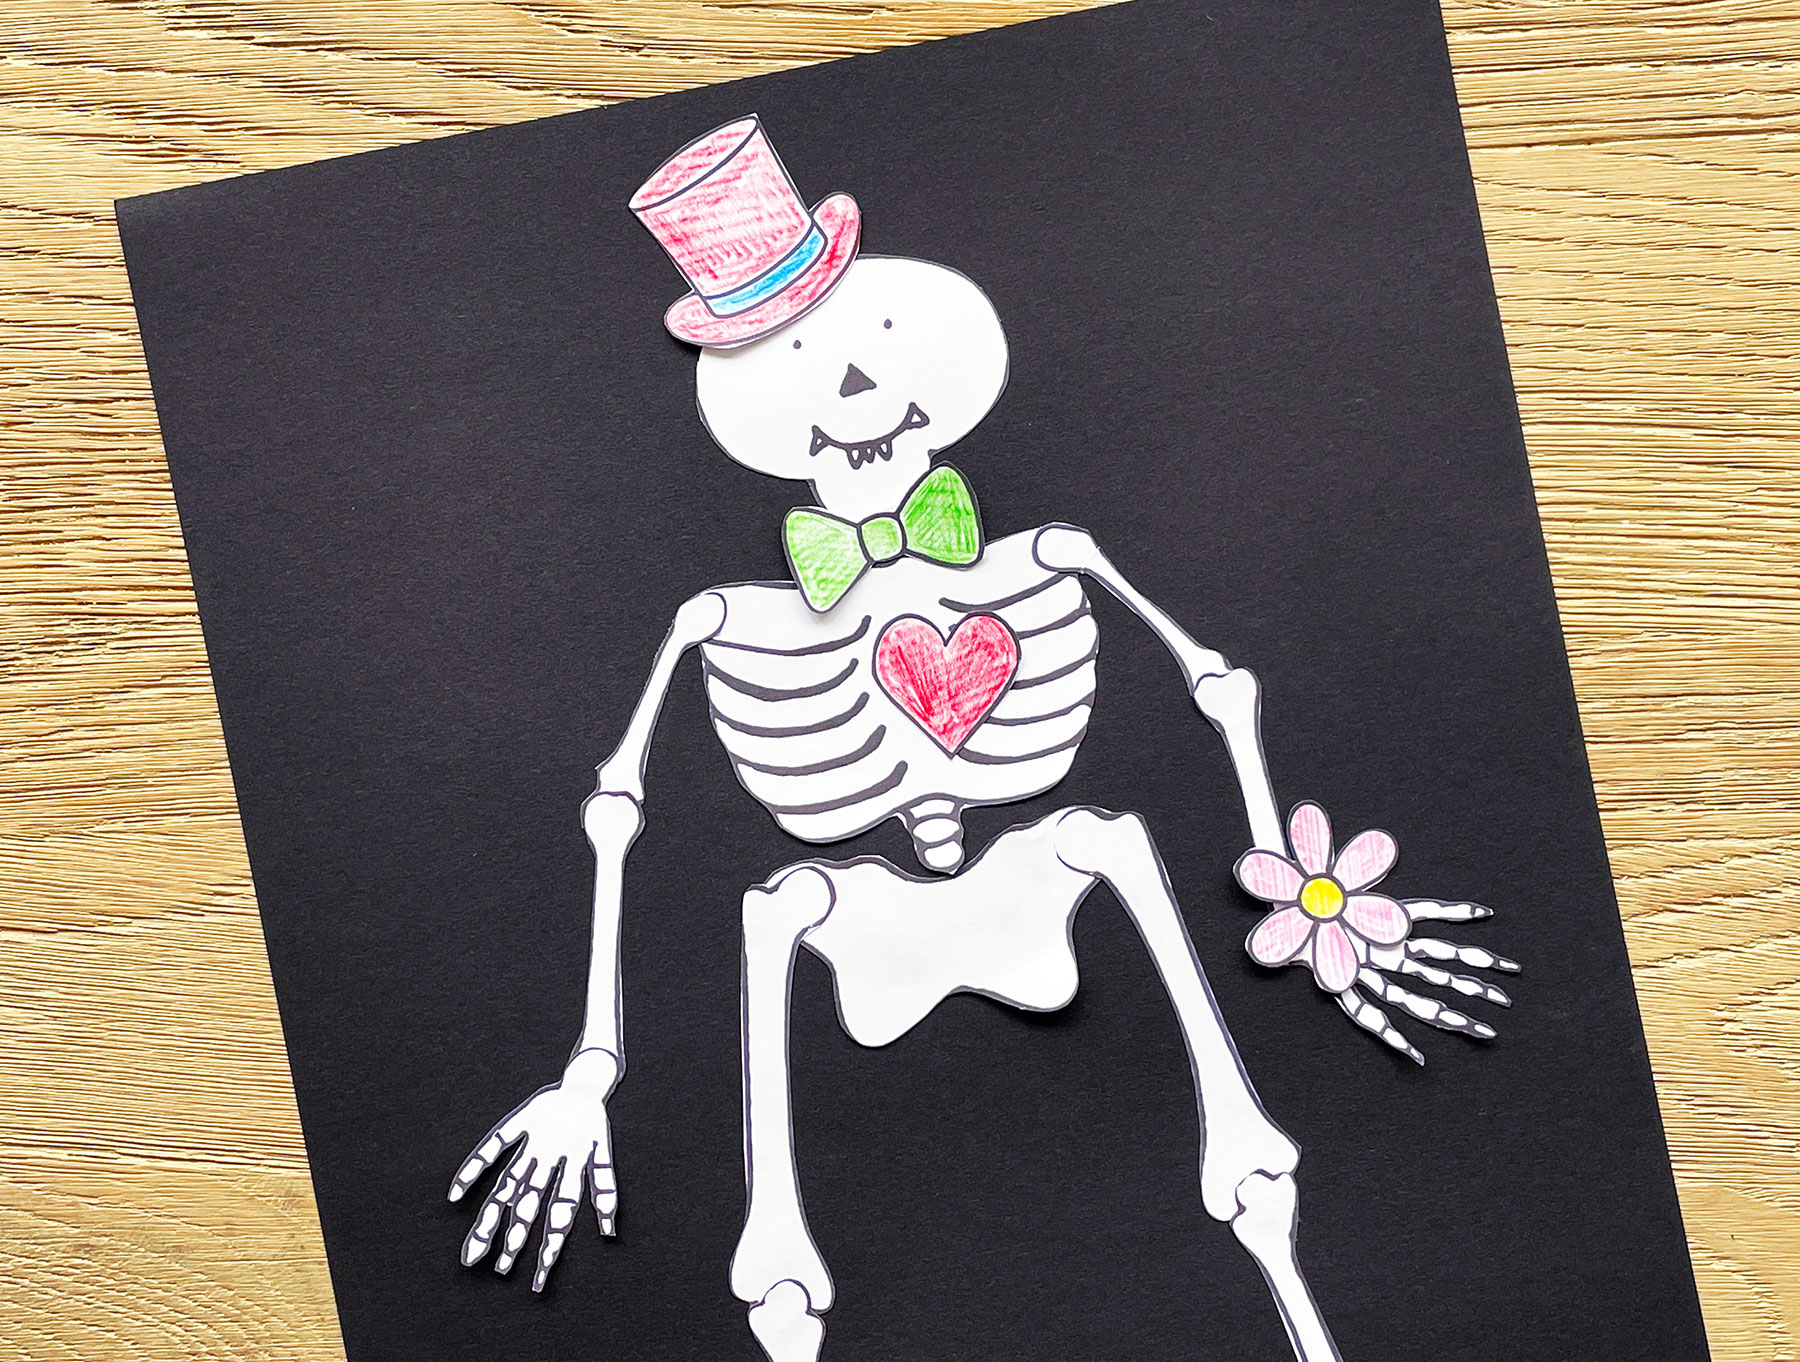 A photo of a cut out Funnybones character on a piece of black paper on top of a wooden table